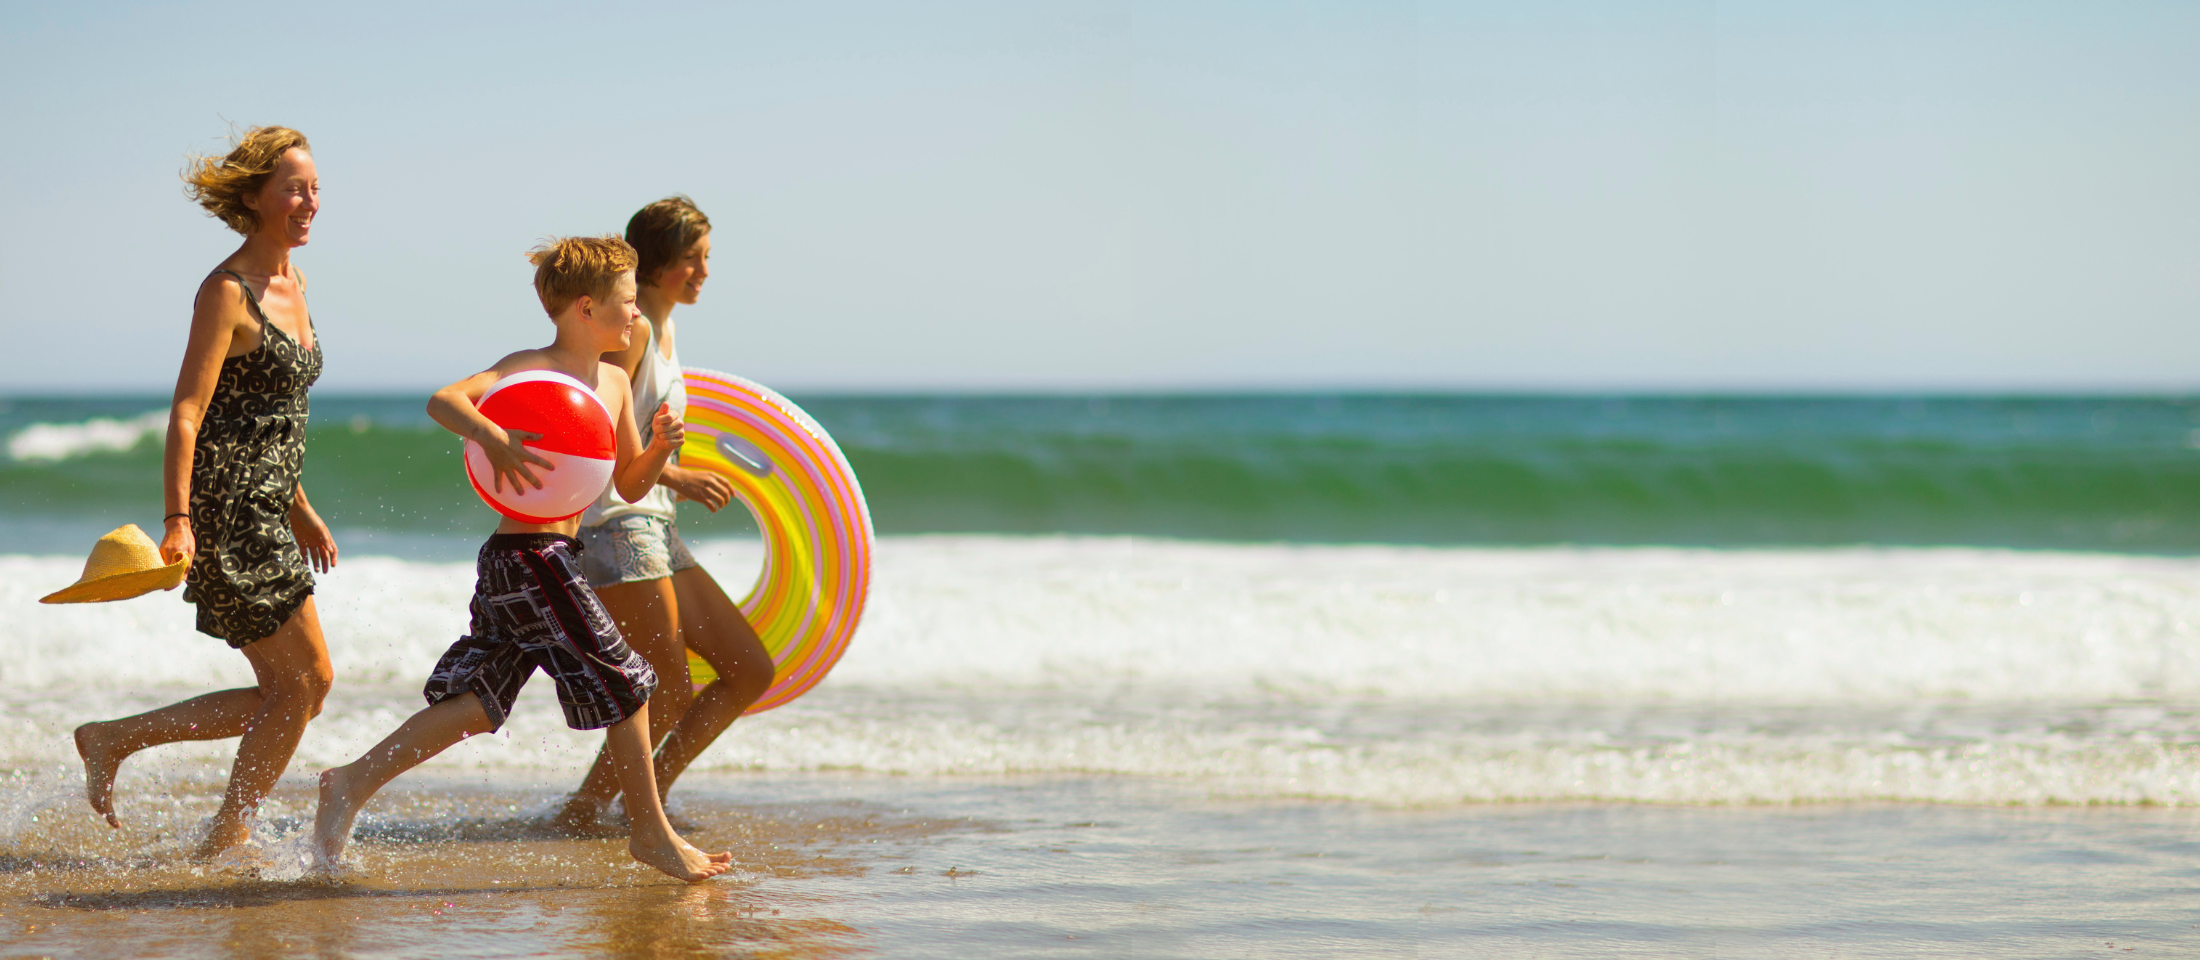 Summer Illness and Beach Accidents